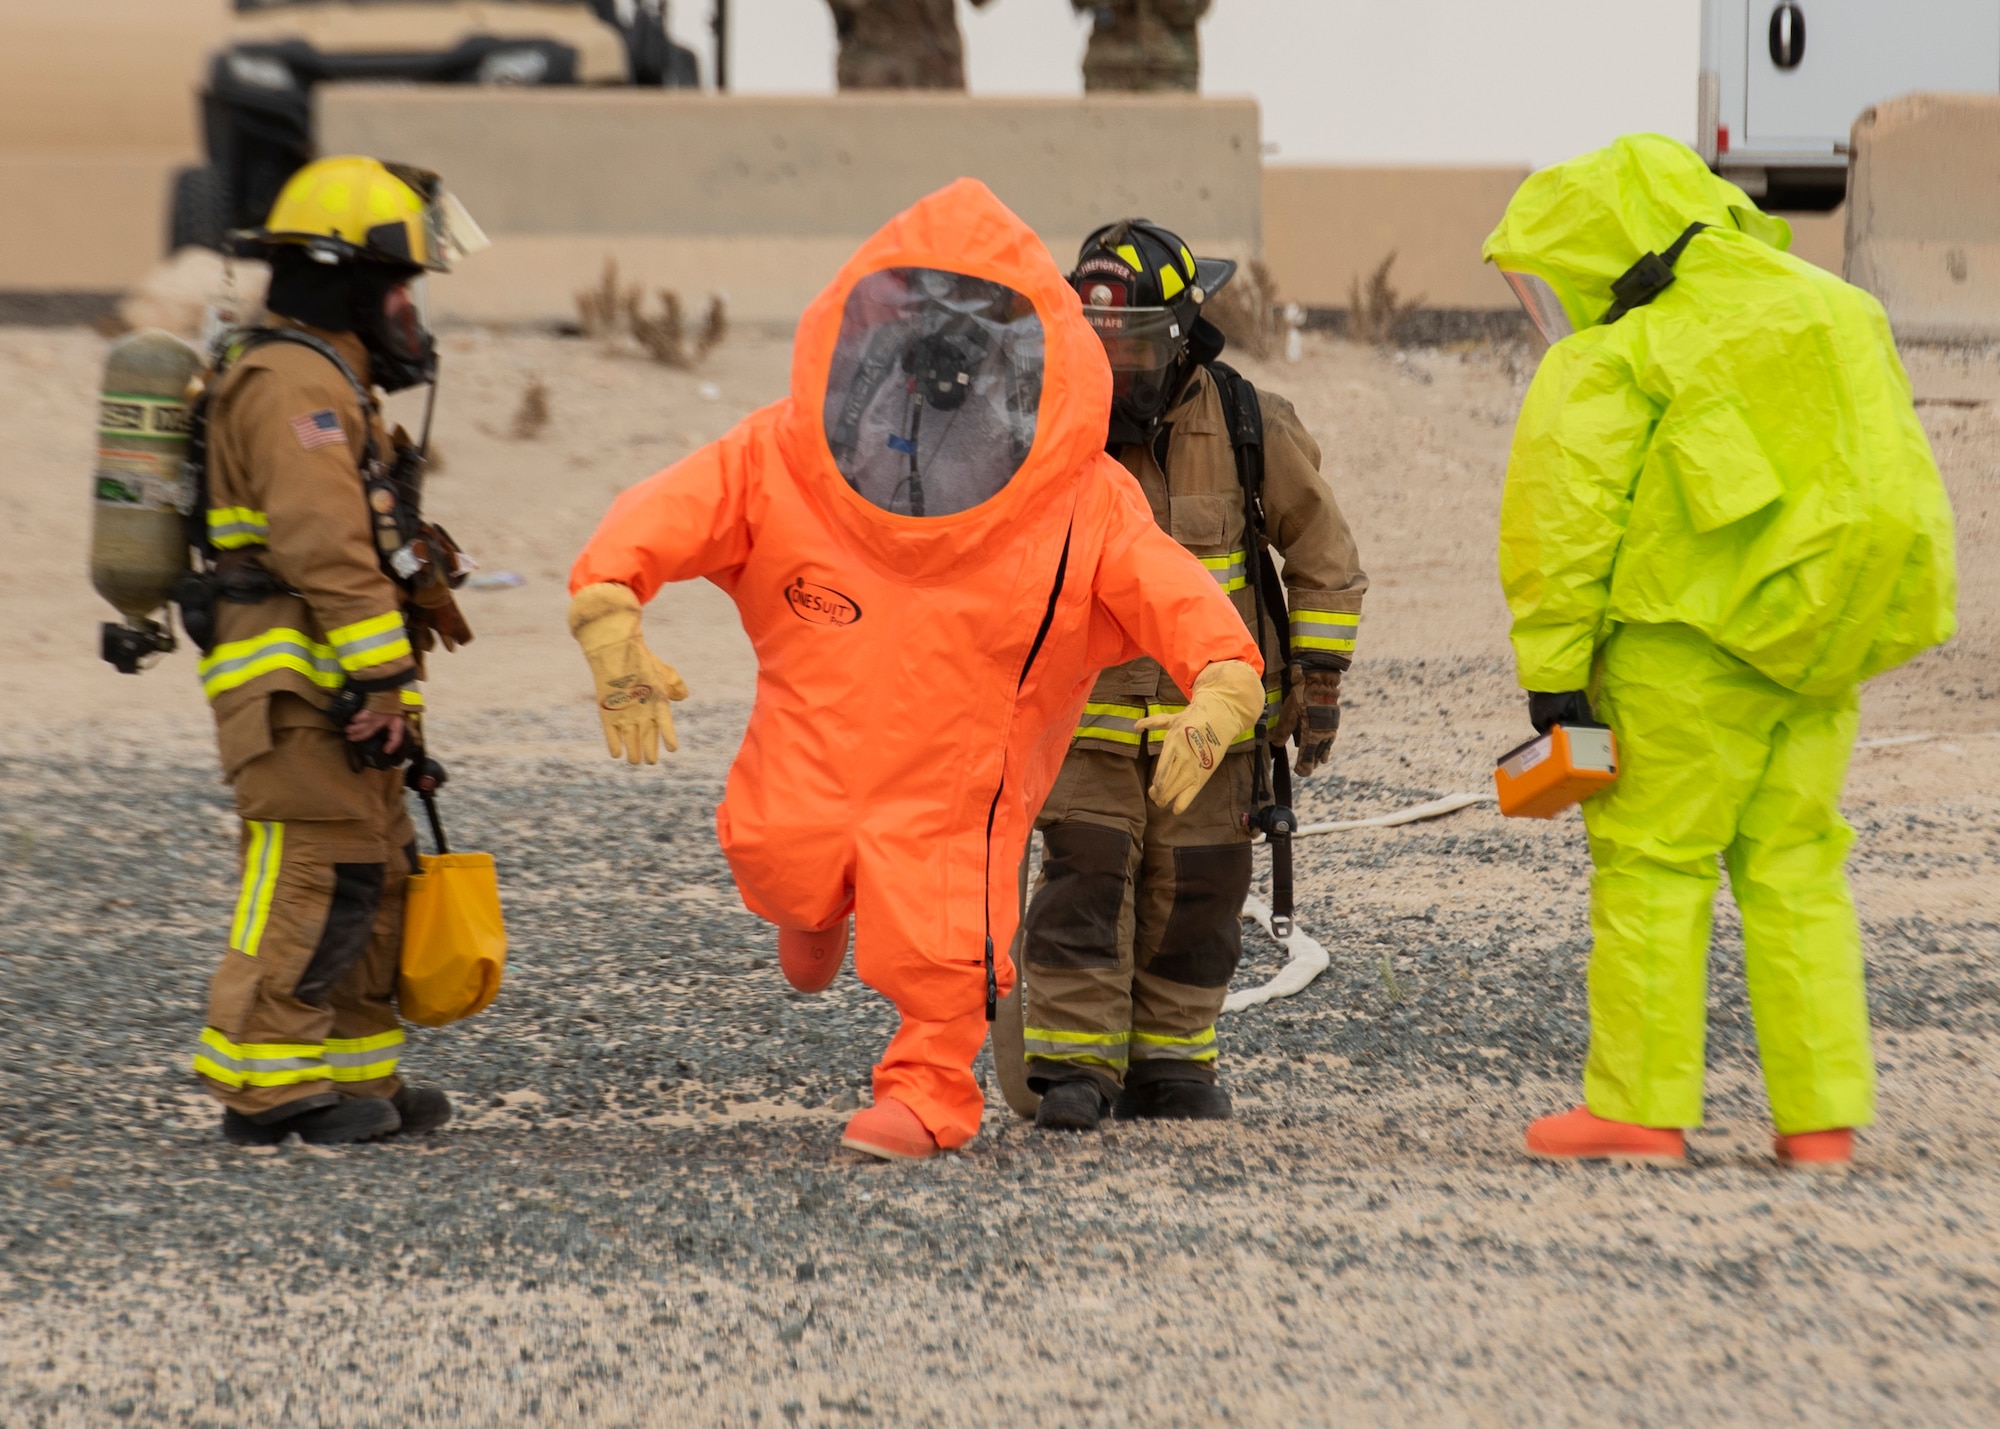 First responders from the 386th Air Expeditionary Wing respond to a simulated chemical exposure incident during a training exercise at Ali Al Salem Air Base, Kuwait, May 5, 2020. The all-hazard exercise was designed to enhance interoperability between multiple first responder teams with the goal of responding, identifying and controlling potential real-world scenarios. (U.S. Air Force photo by Senior Airman Isaiah J. Soliz)